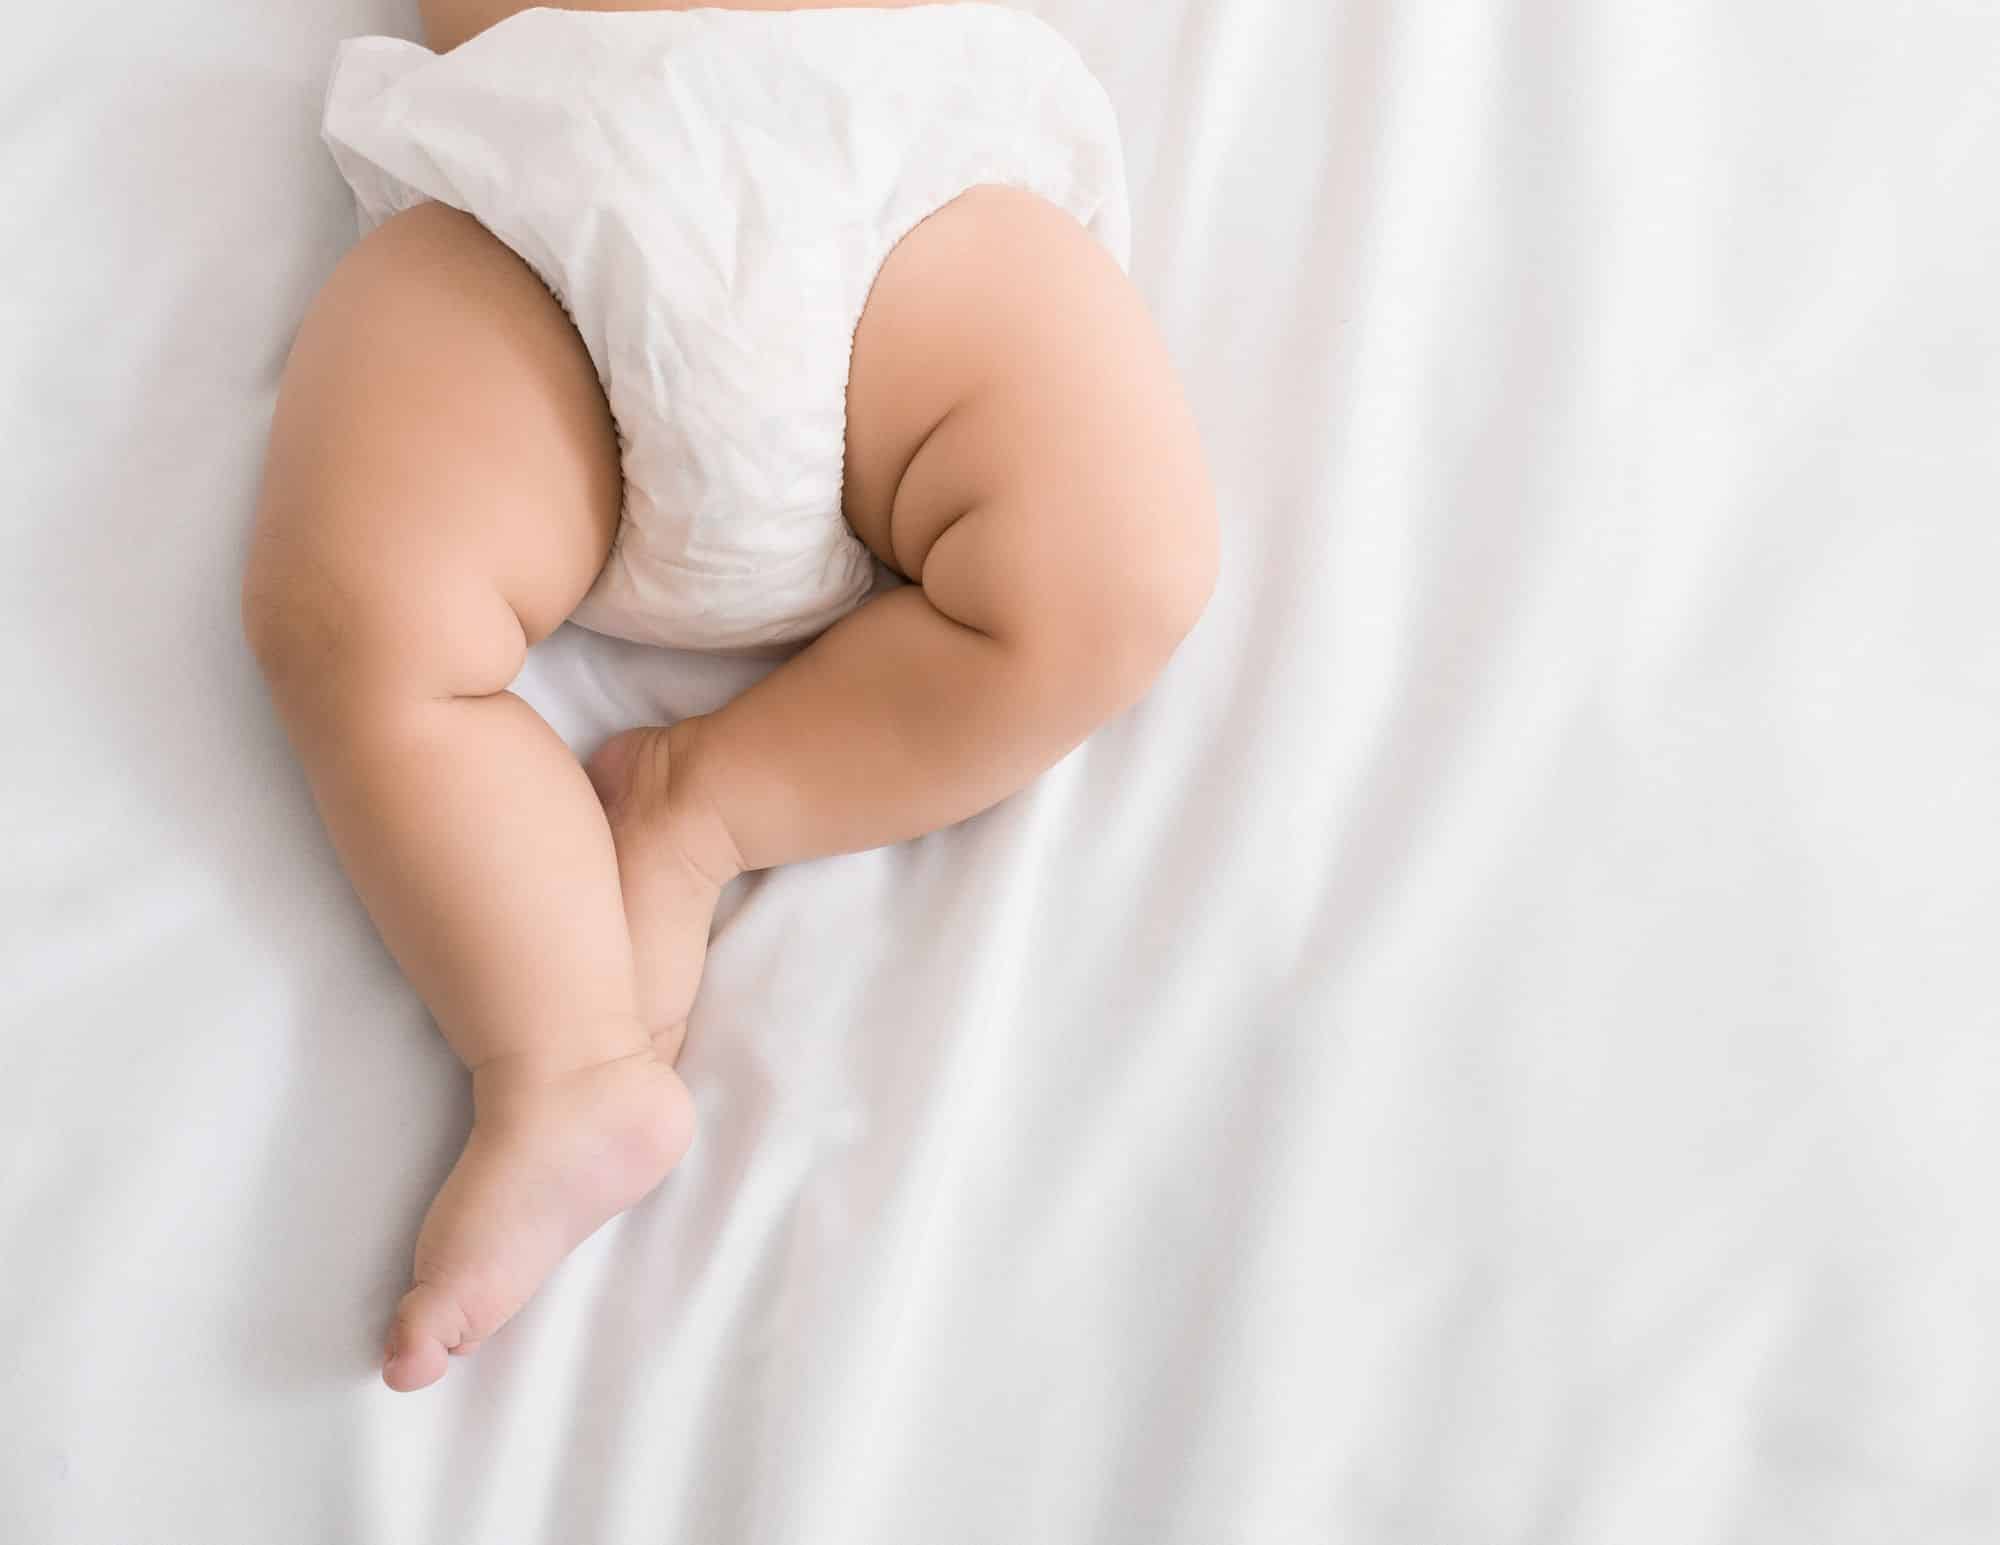 Tutorial Tuesday: Easily Hiding Diapers in Newborn Portraits